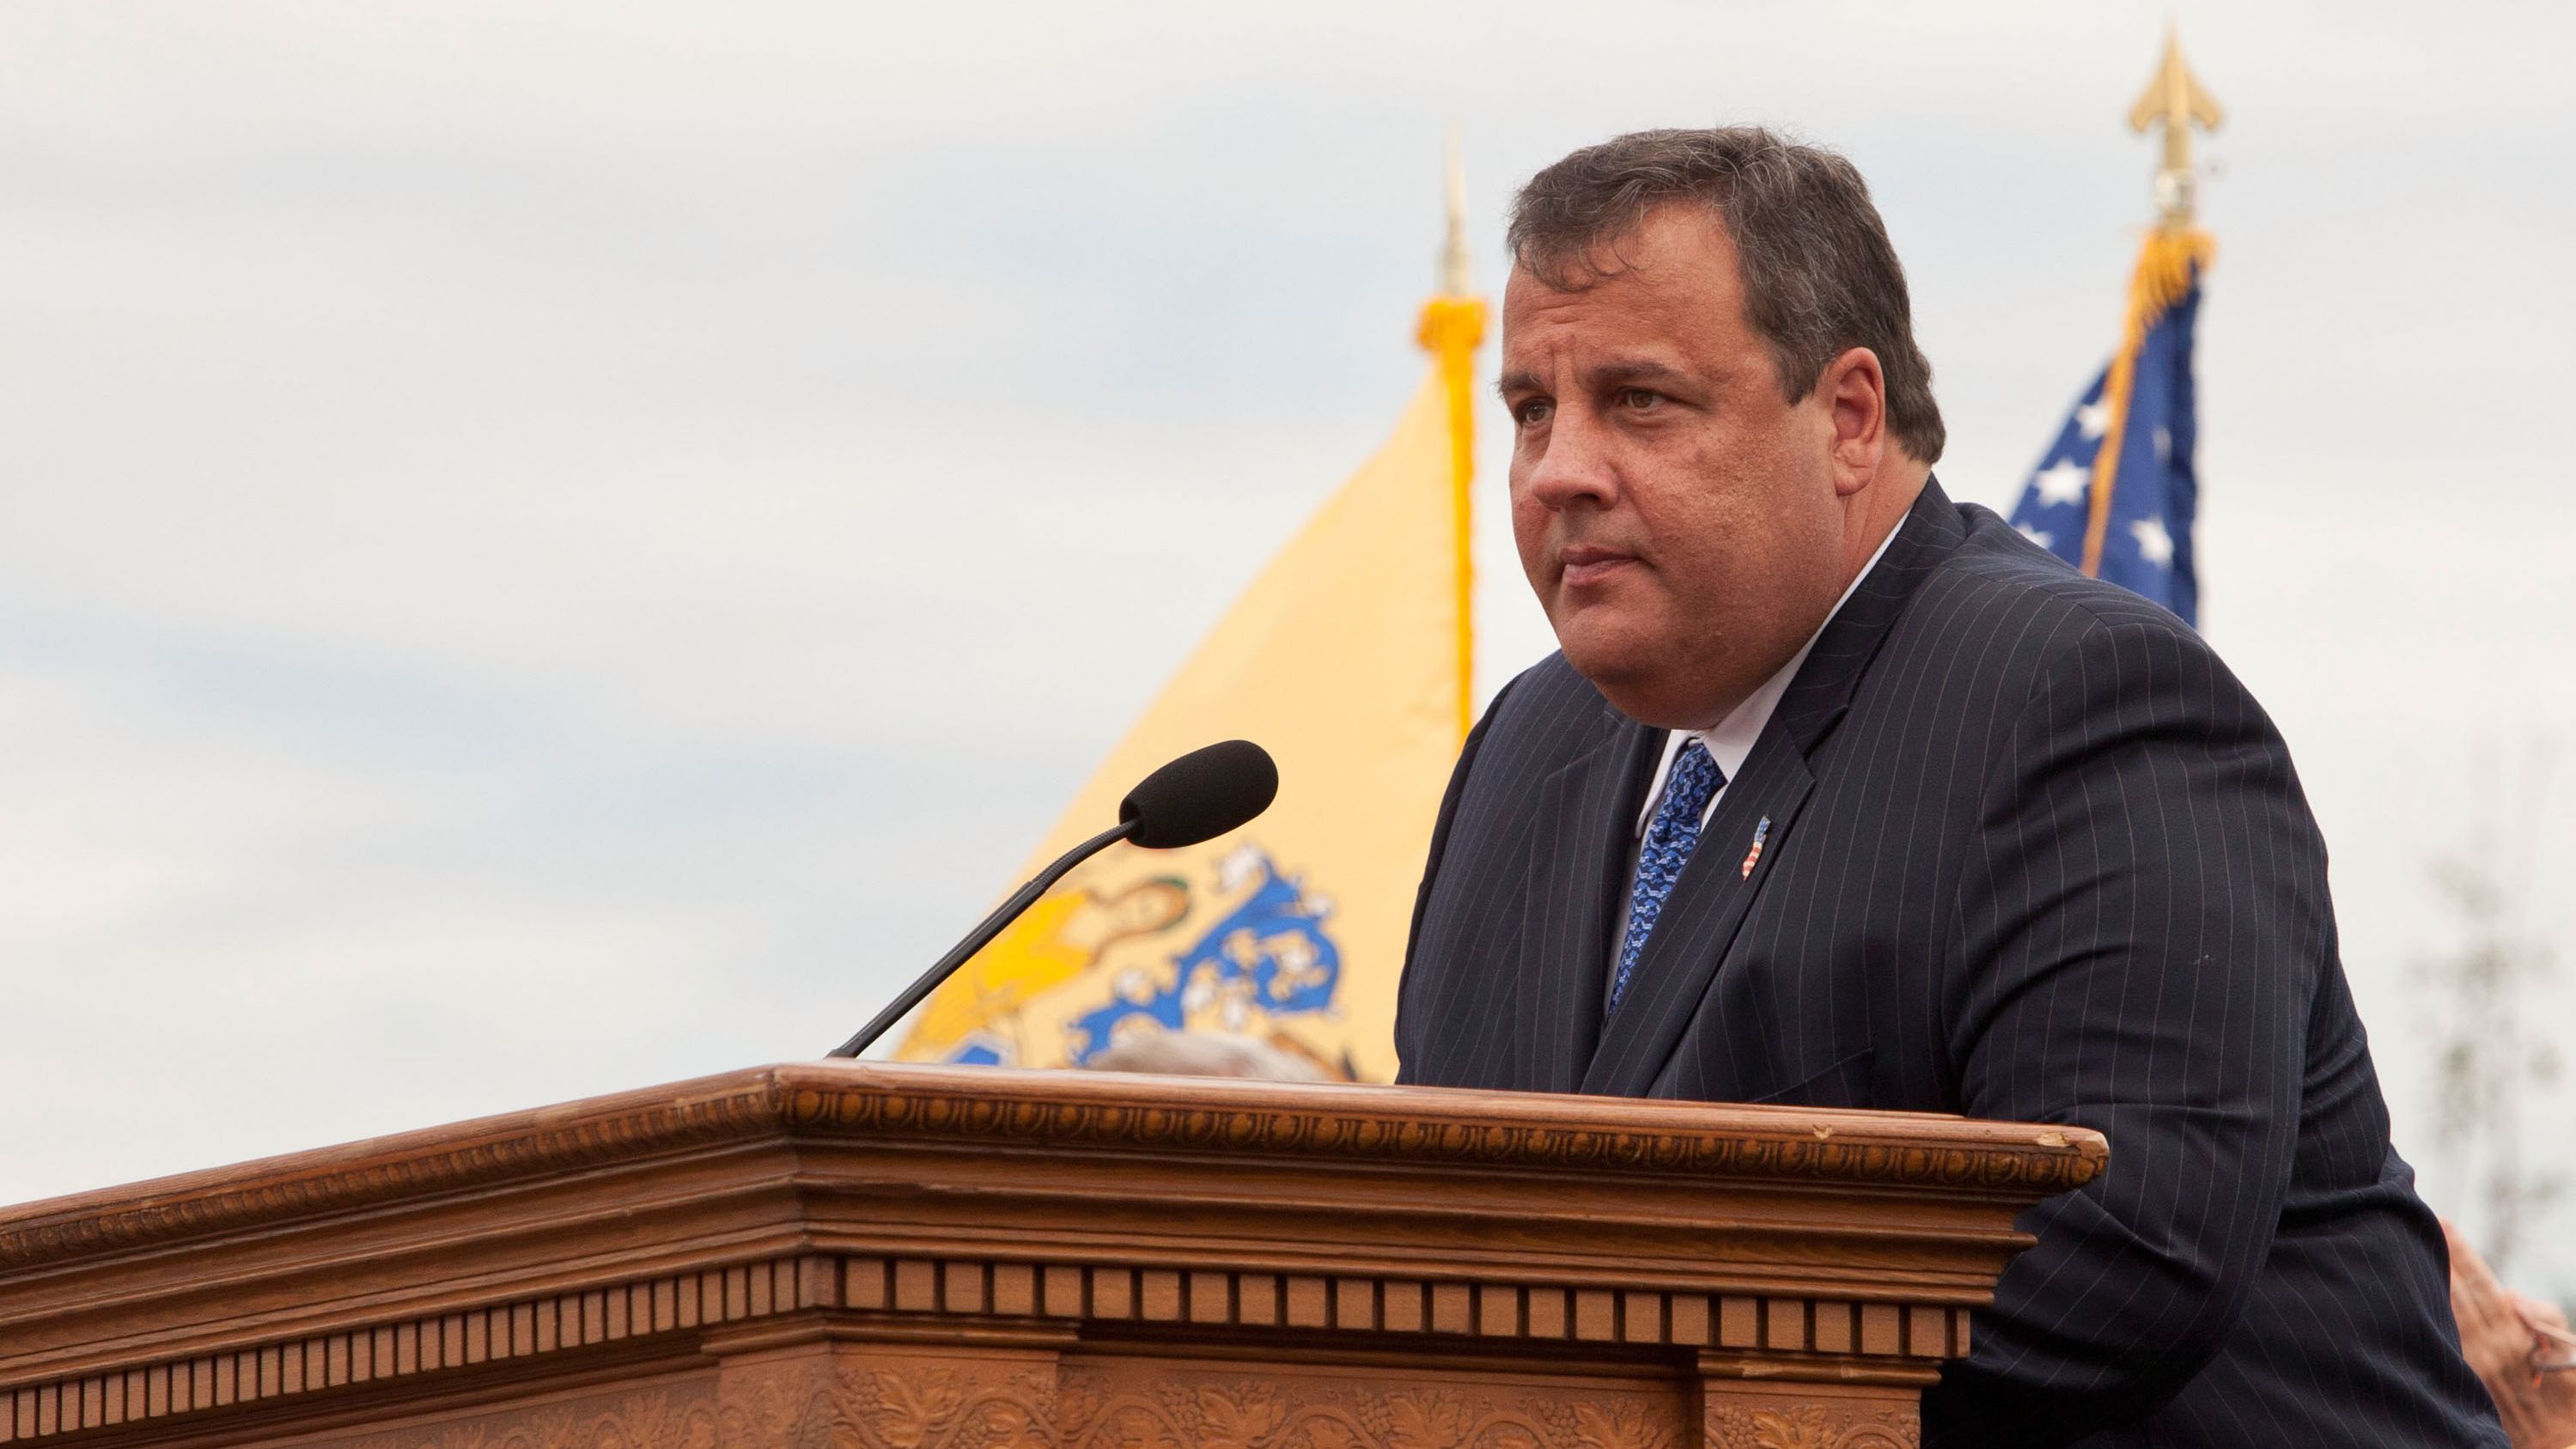 Reports often featured derogatory comments about New Jersey Gov. Chris Christie's weight as he pondered a presidential run.